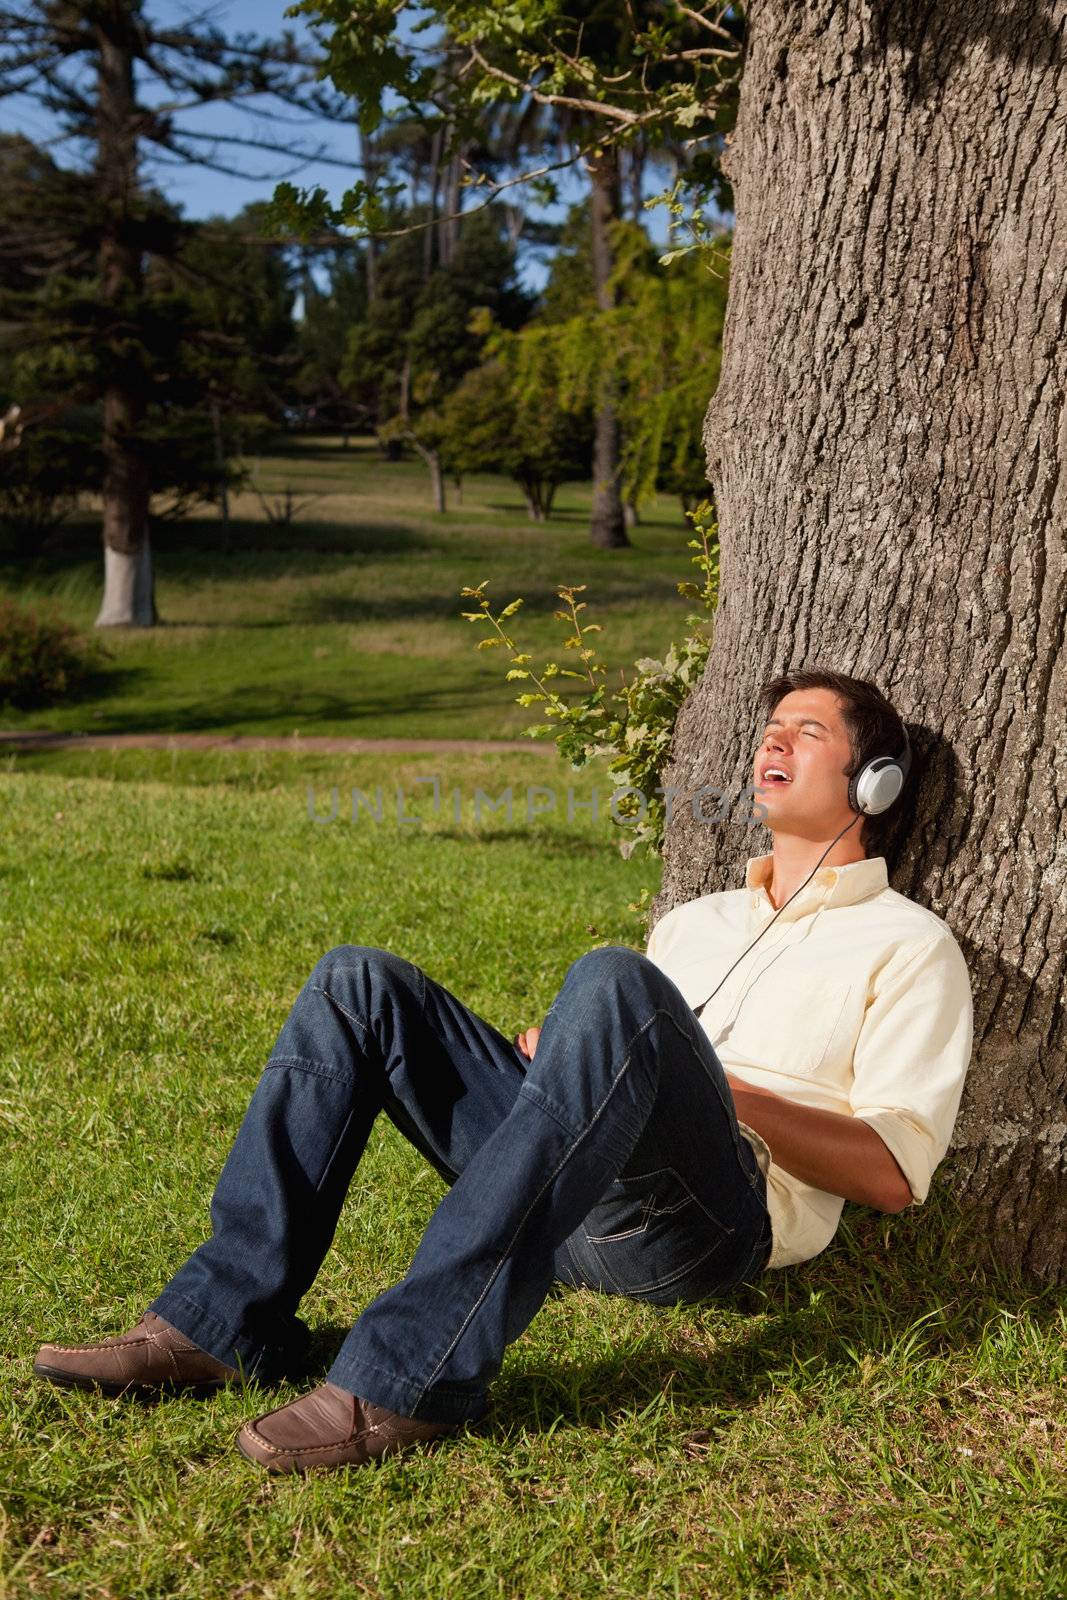 Man singing while using headphones to listen to music as he rests against the trunk of a tree